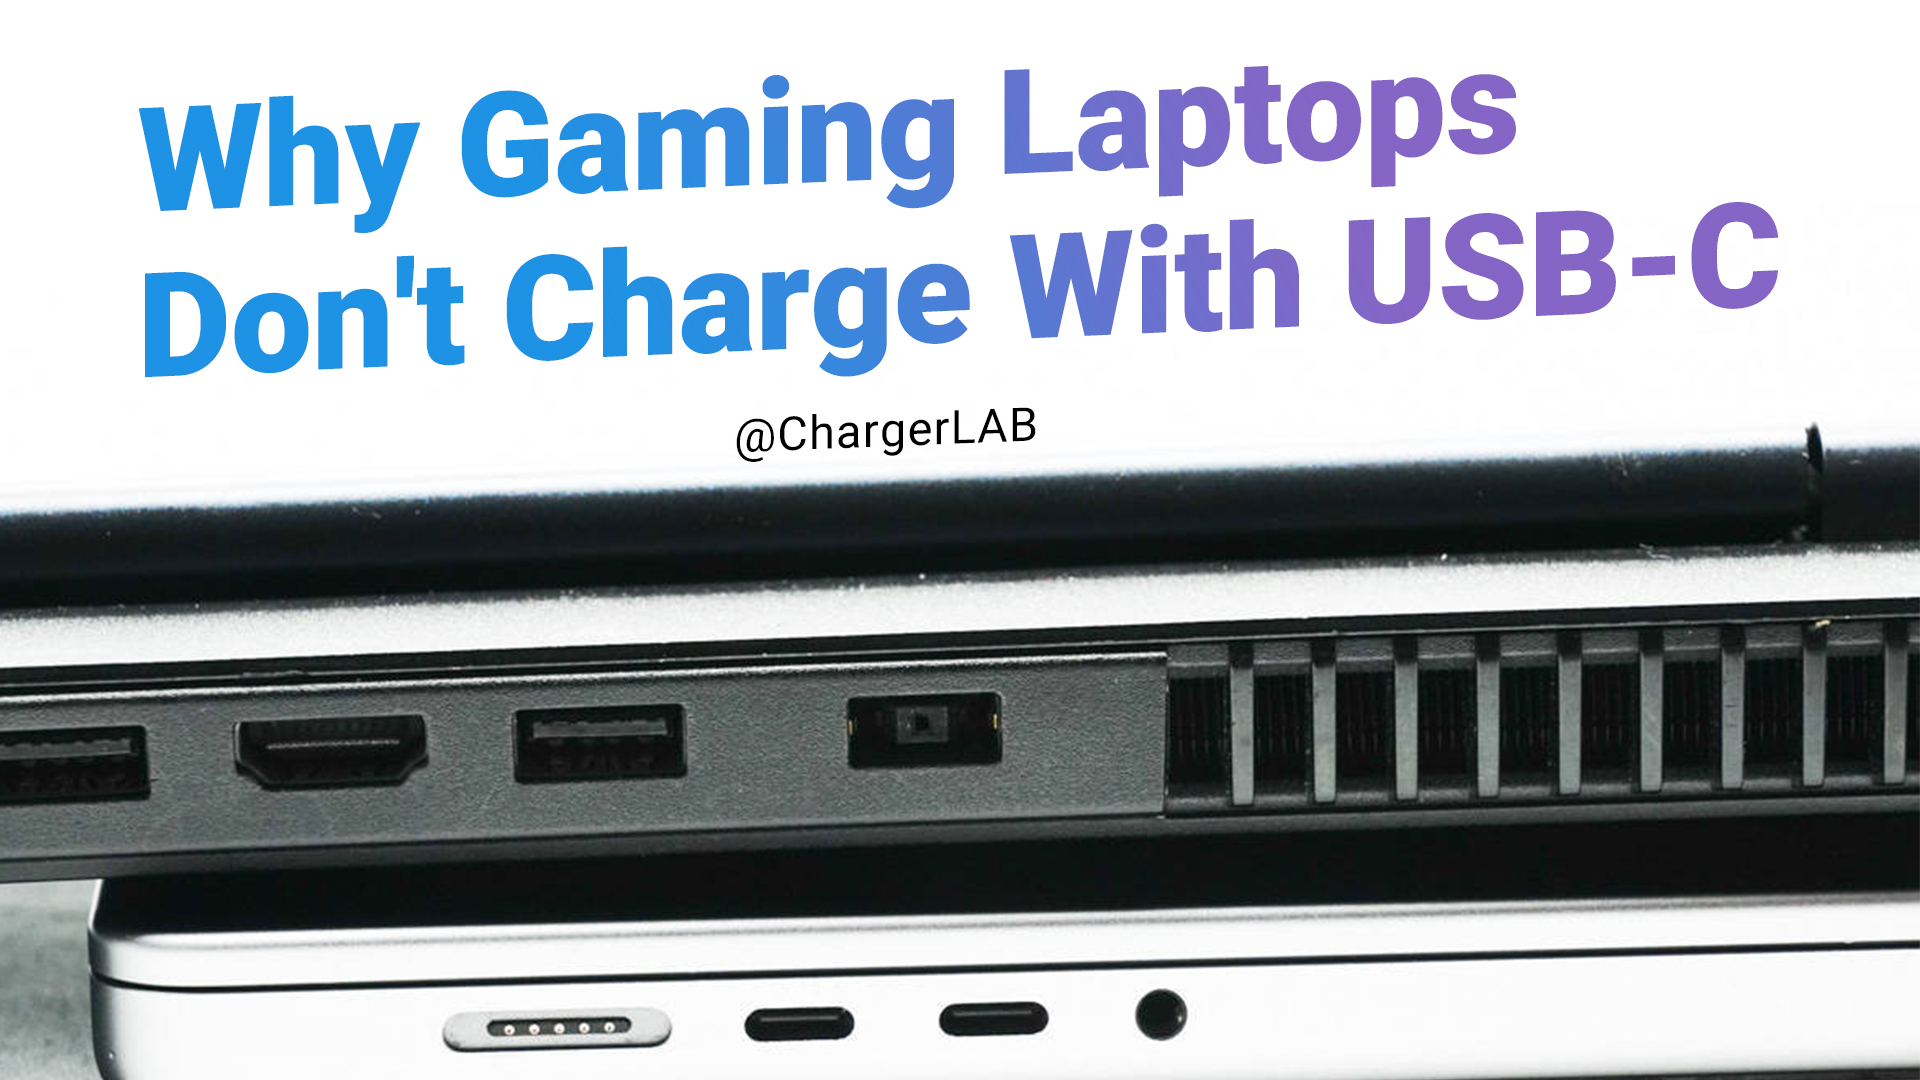 Champagne Mug hul Why Gaming Laptops Don't Charge With USB-C? - Chargerlab